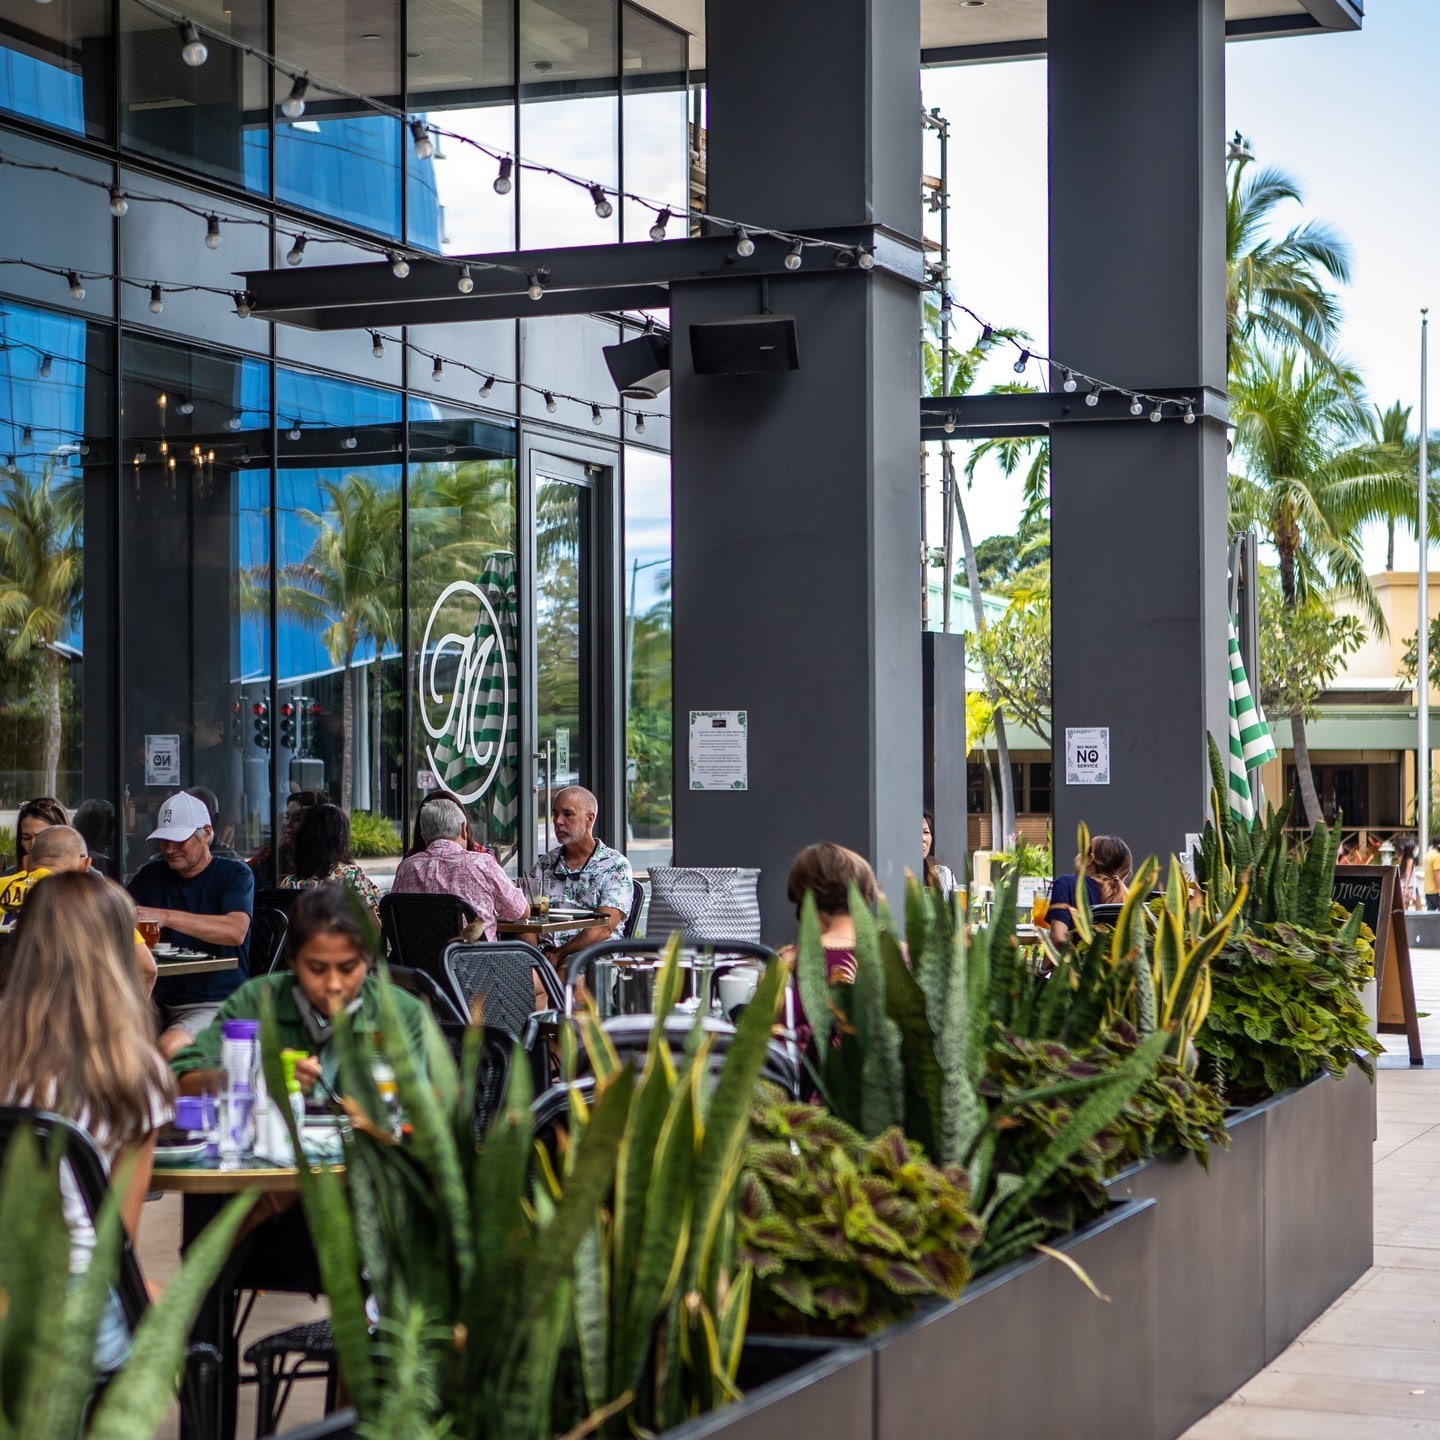 We’re excited to see what’s new at @merrimanshonolulu with recently appointed Restaurant Chef Lance Kosaka. A longtime Executive Chef on O'ahu, Kosaka will be leading the Merriman’s kitchen team and bringing new recipes to the neighborhood.